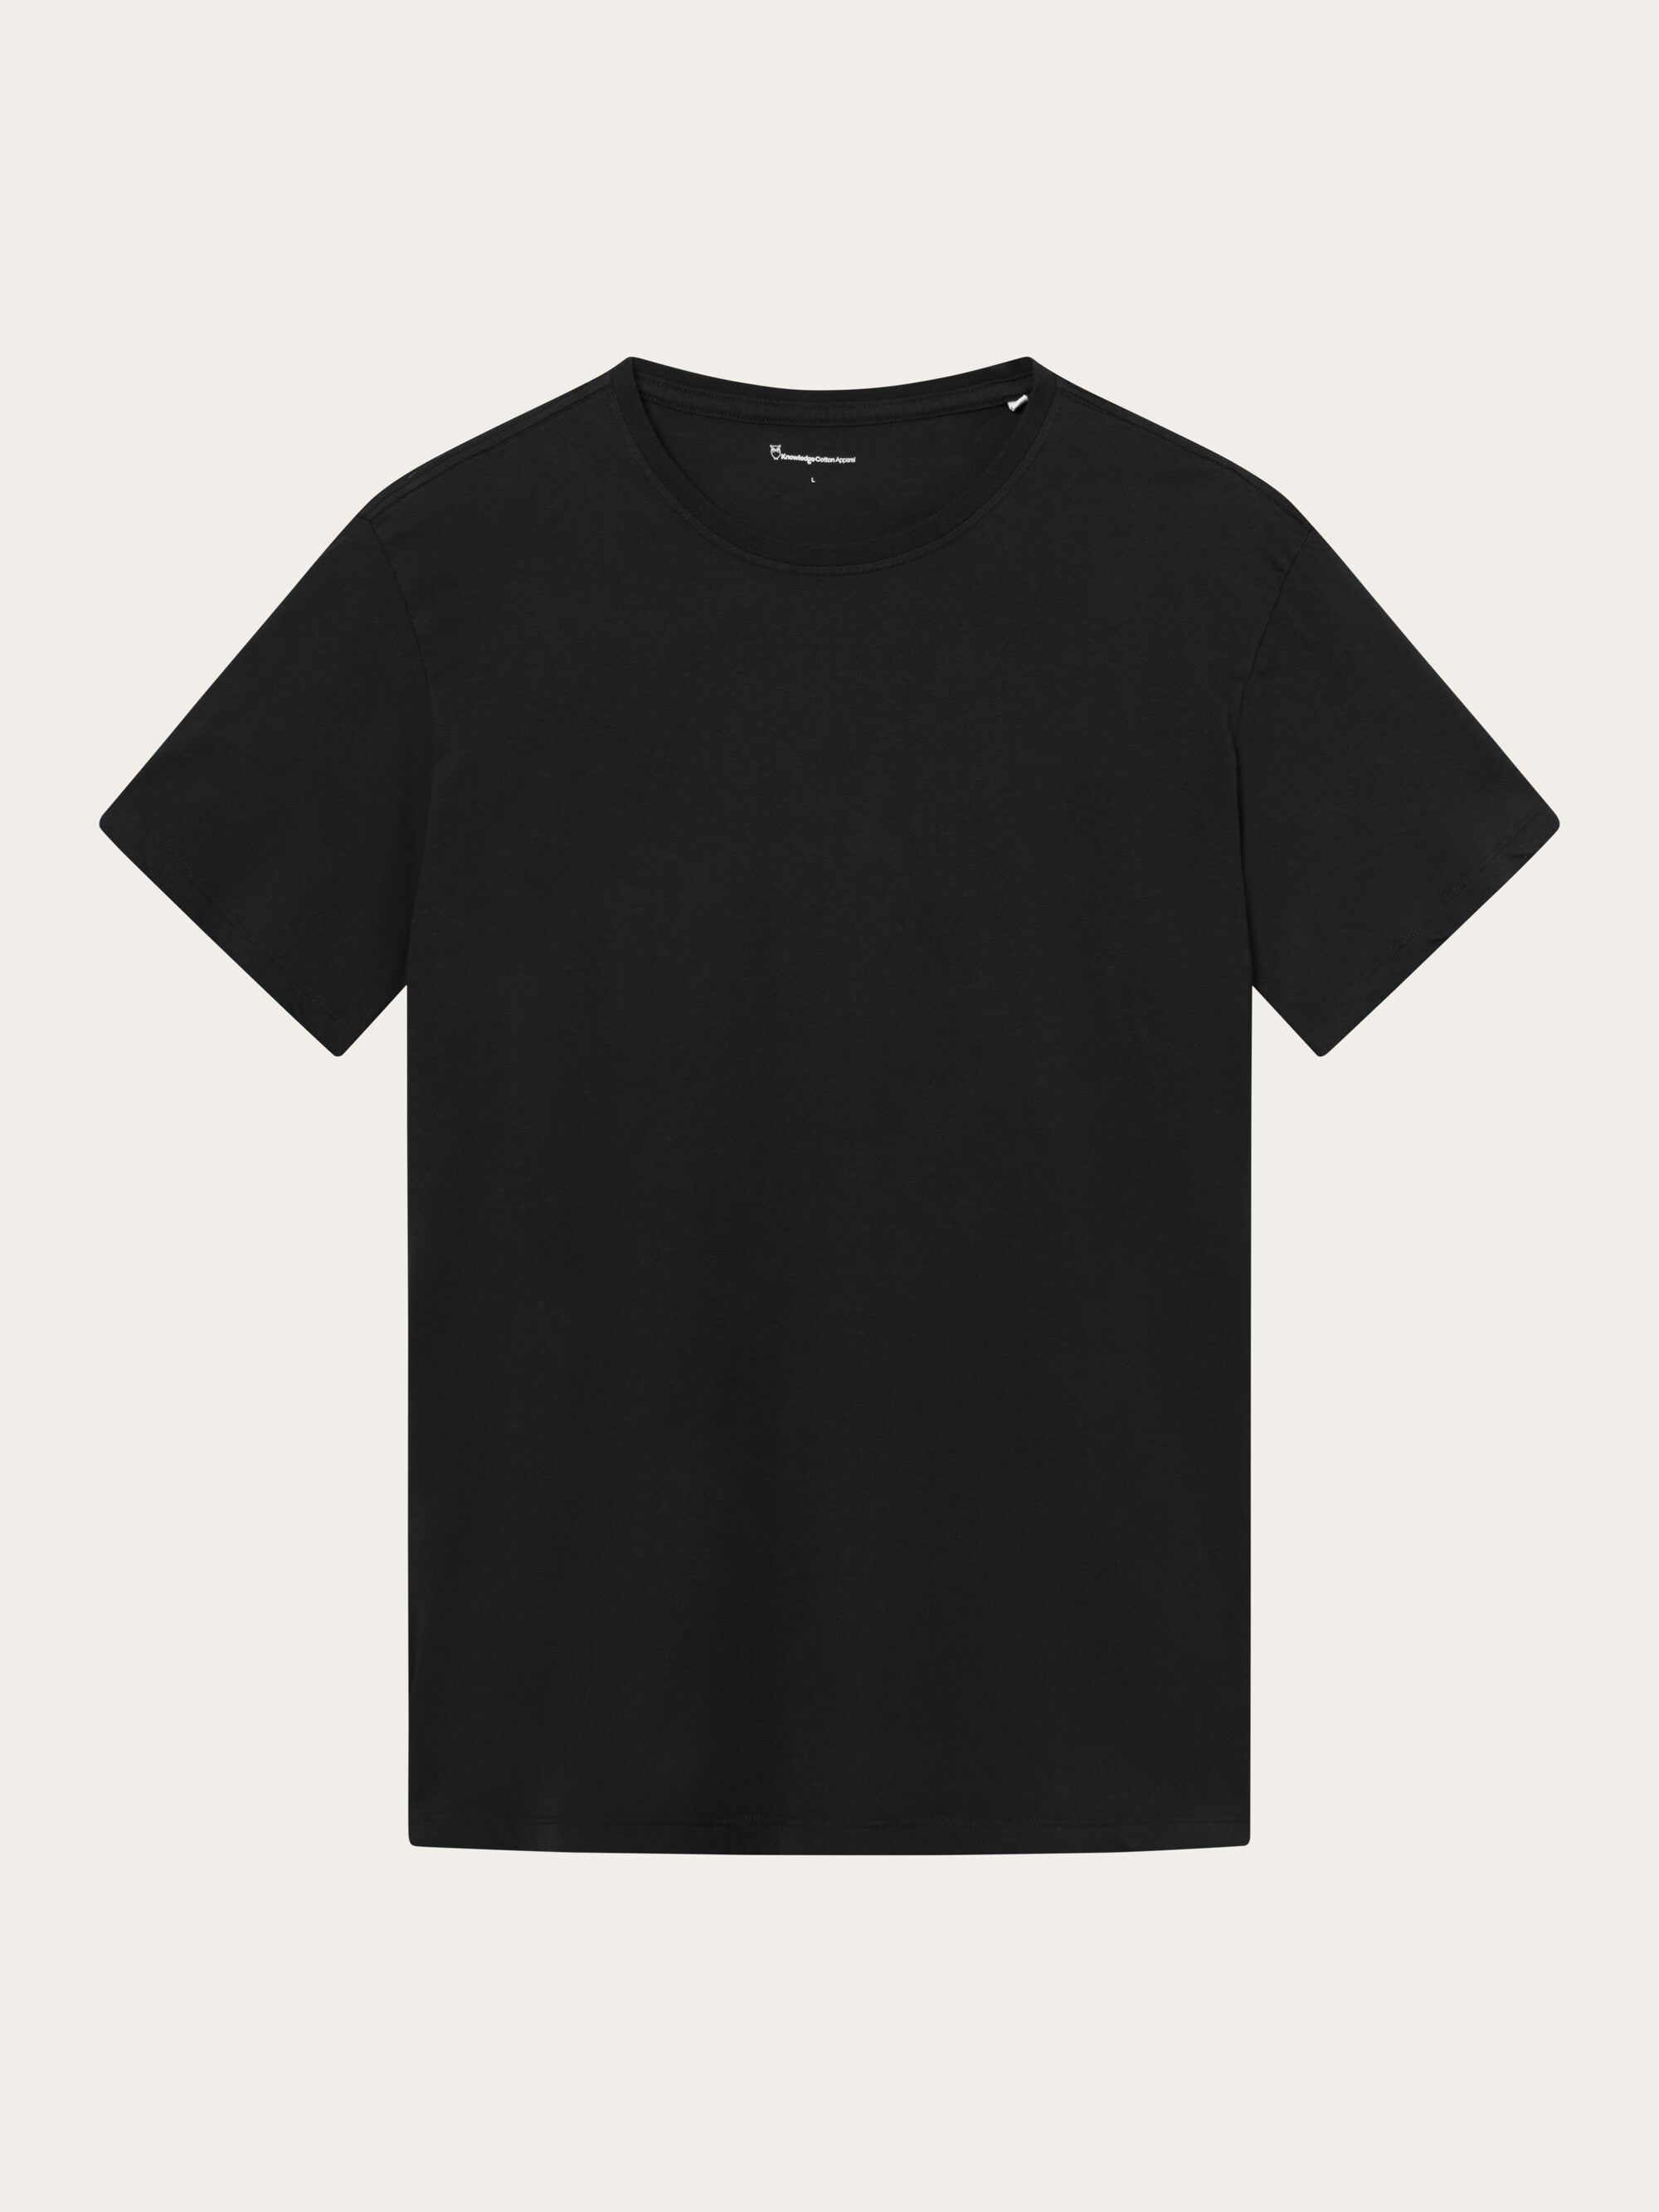 Buy Regular fit Basic tee - Black Jet - from KnowledgeCotton Apparel®